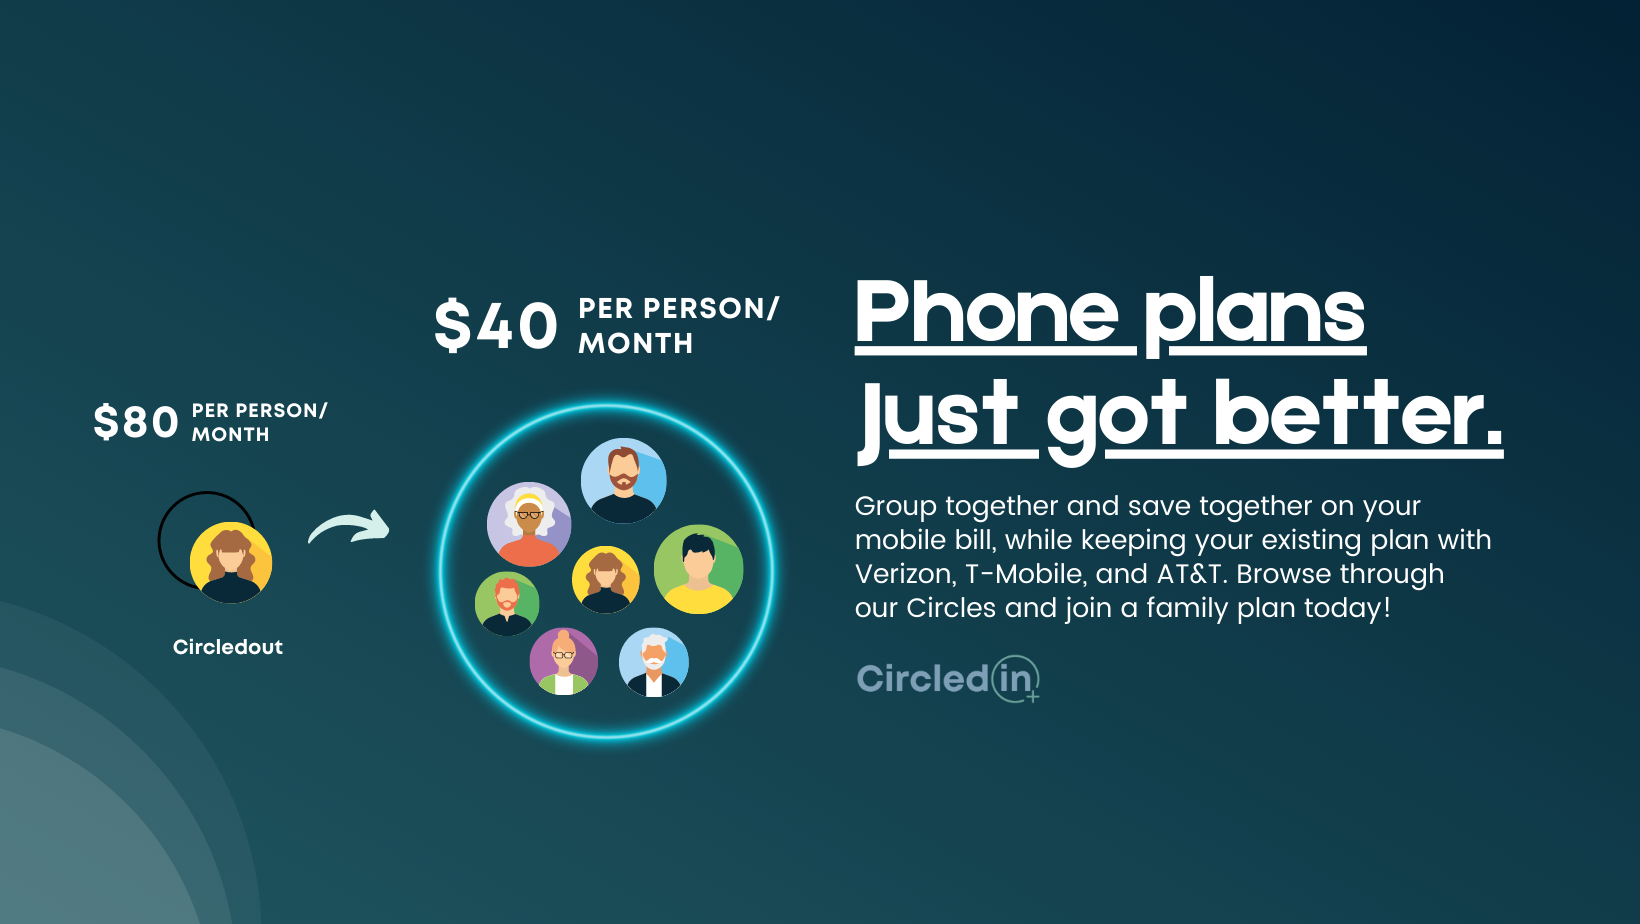 Circledin - Various Postpaid plans from AT&T,T-Mobile, and Verizon at Family pricing!